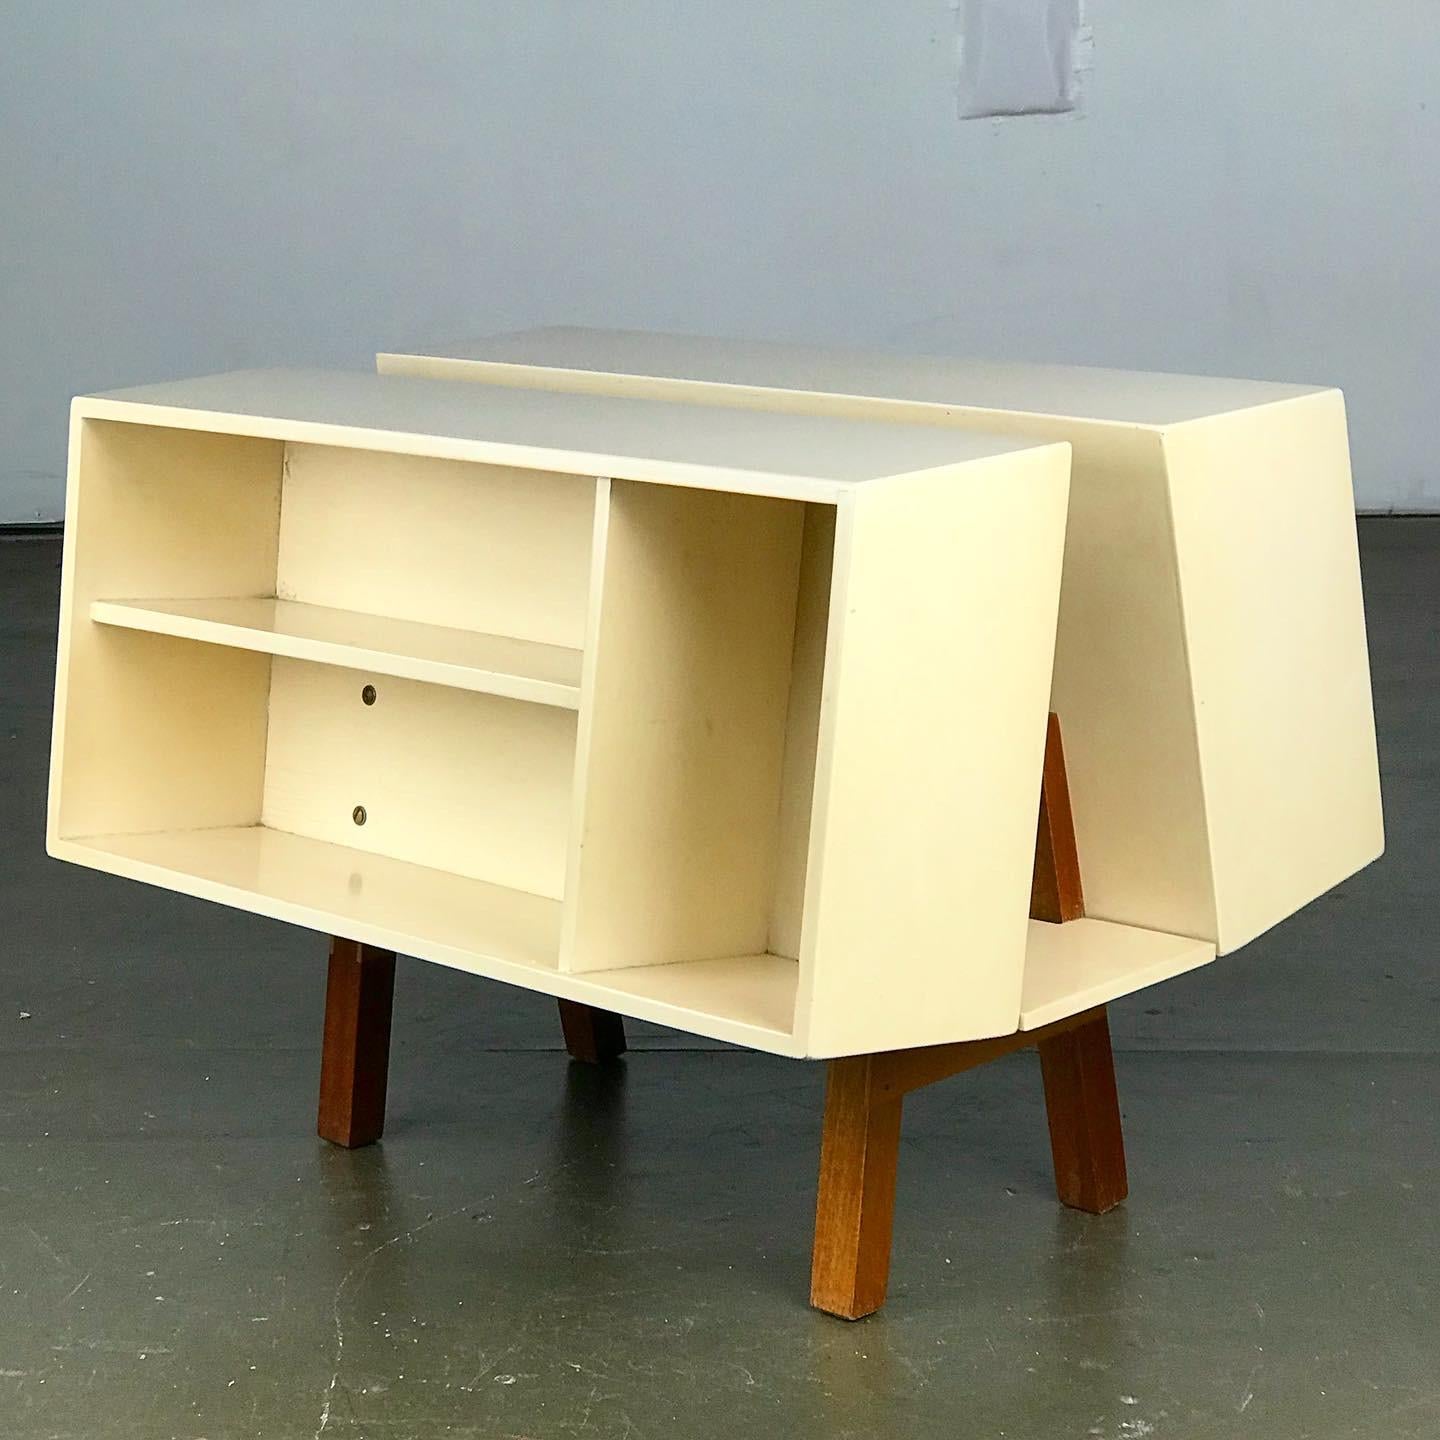 Scarce petite Penguin Donkey Mark 2 bookcase/table by Ernest Race for Isokon, 1963, England. Originally designed in the late 1930s by Egon Riss and called 